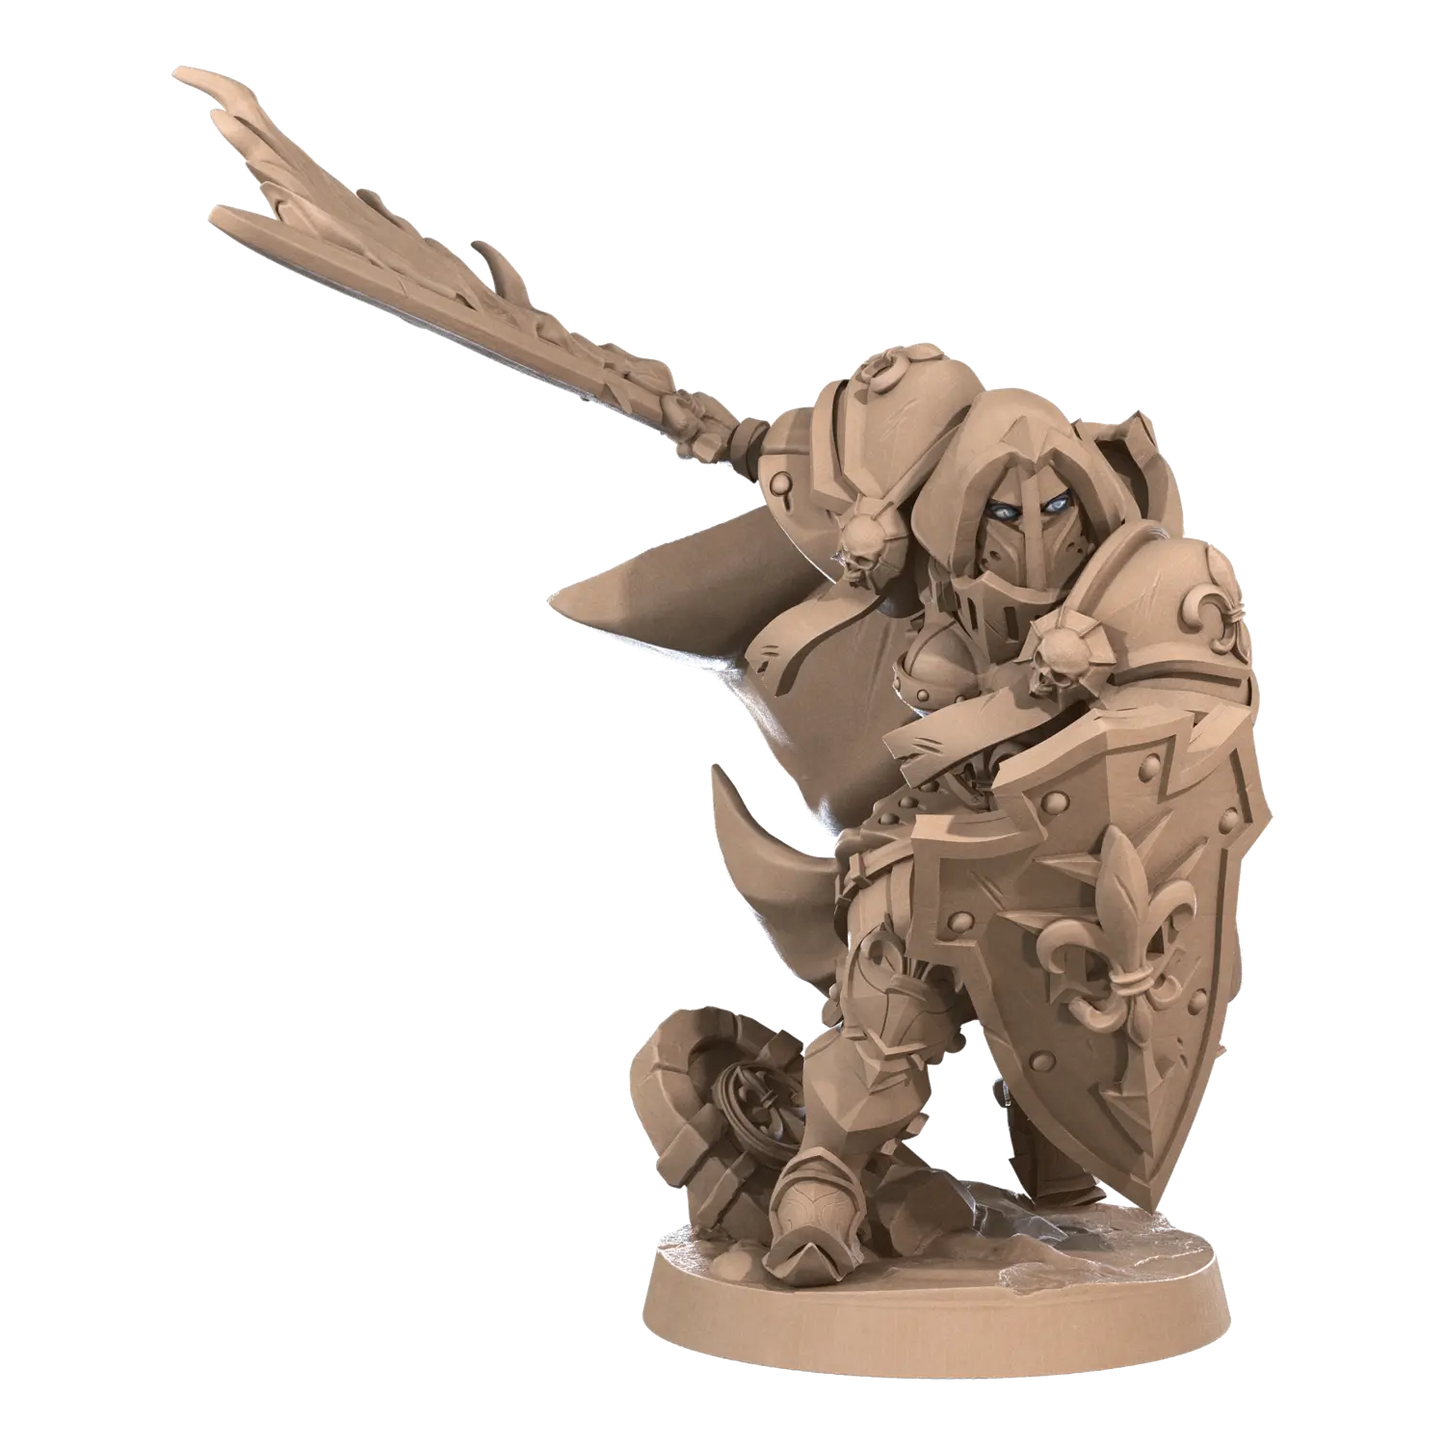 DnD Battle Sisters - Fighter - Human - Miniature - Paladin Rosalind 01 Battle Sisters - Fighter - Human - Miniature - Paladin sold by DoubleHitShop